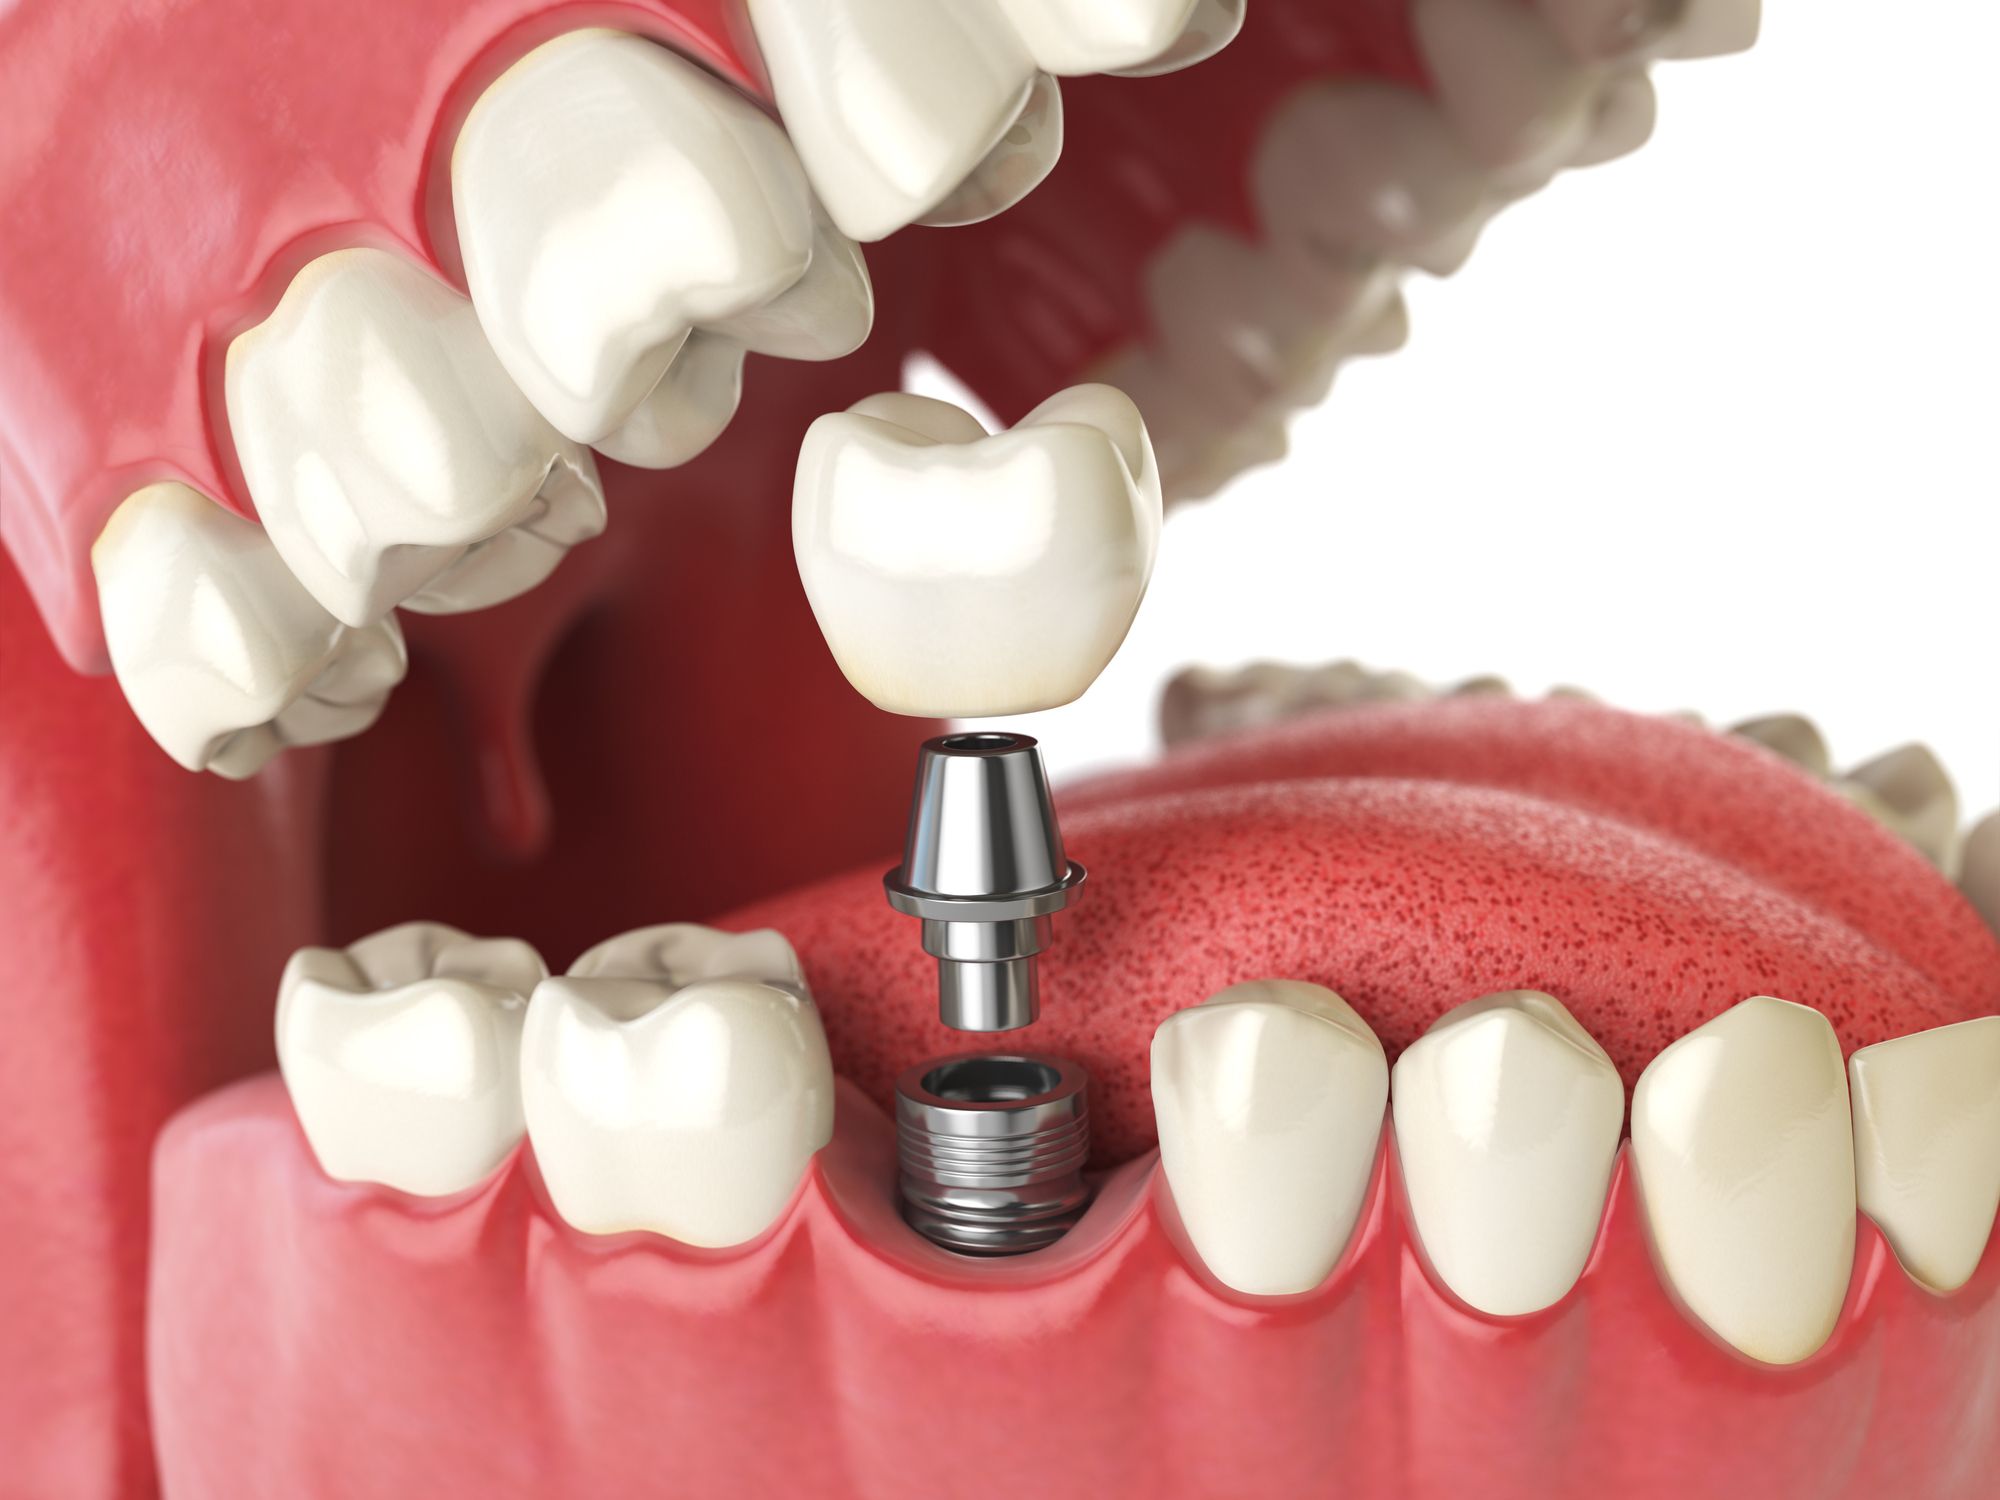 Is a Dental Bridge the right treatment for missing teeth?